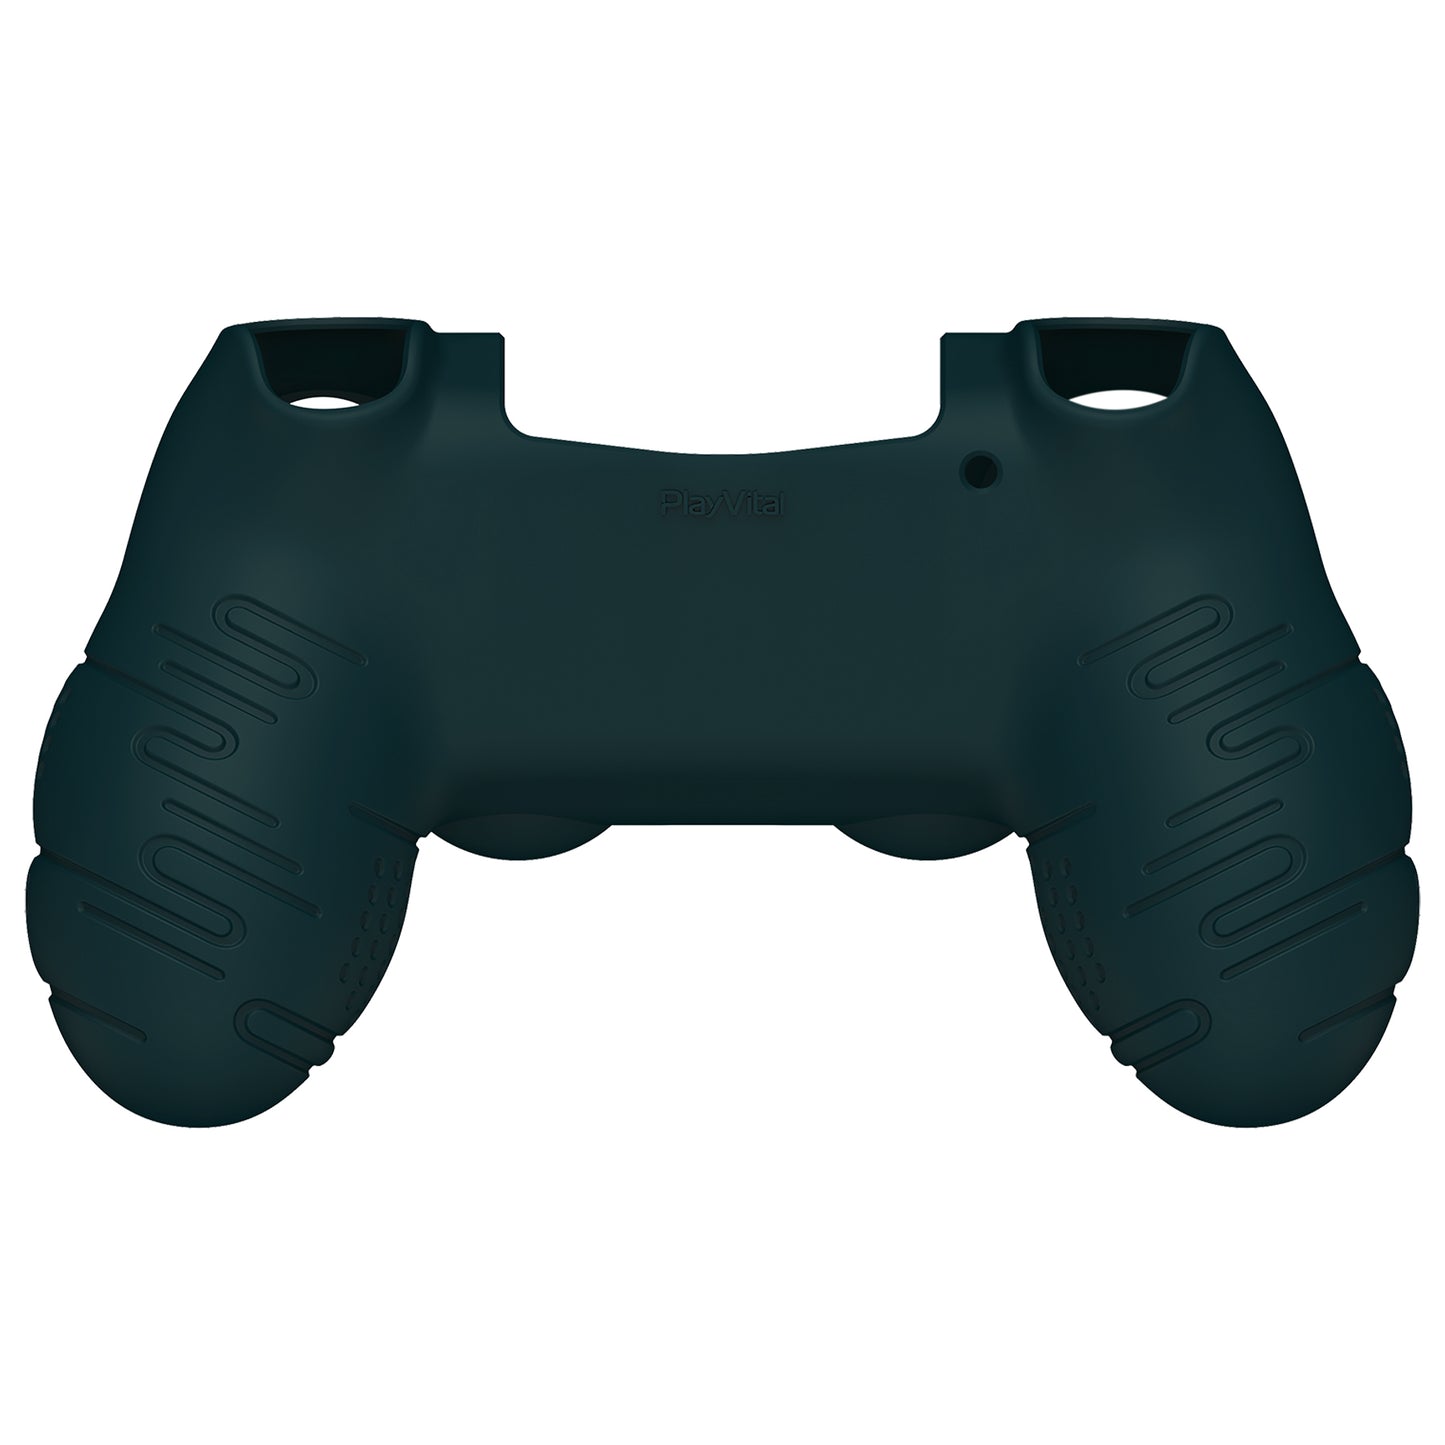 PlayVital Line & Dot Racing Green Silicone Cover Skin for ps4 Controller, Anti-Slip Soft Protector Case Cover with Thumb Grip Caps for ps4 for ps4 Slim for ps4 Pro Controller - CLRP4P003